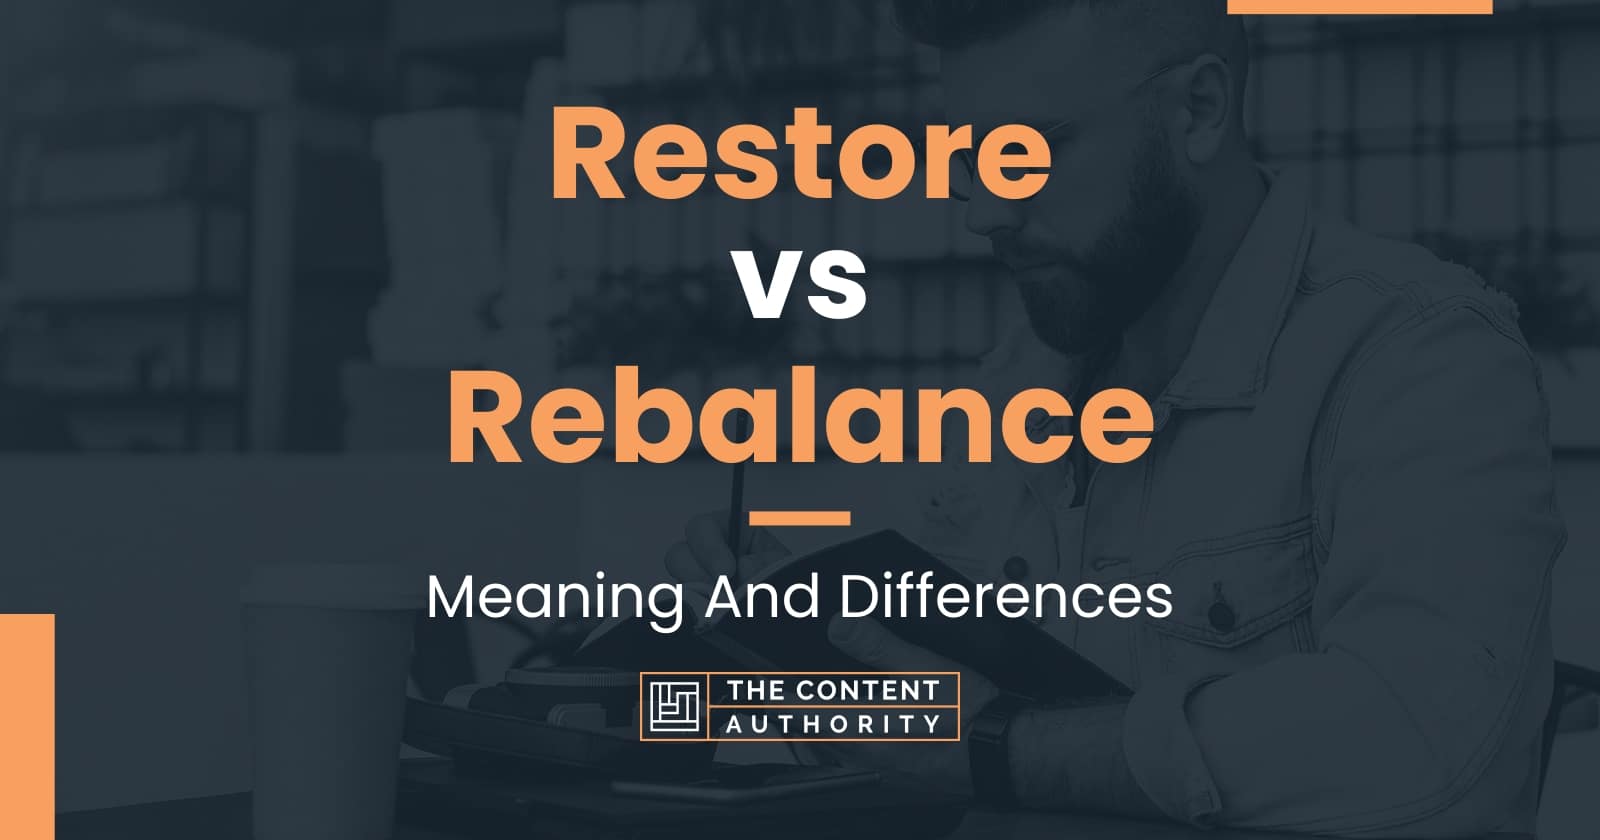 Restore vs Rebalance Meaning And Differences